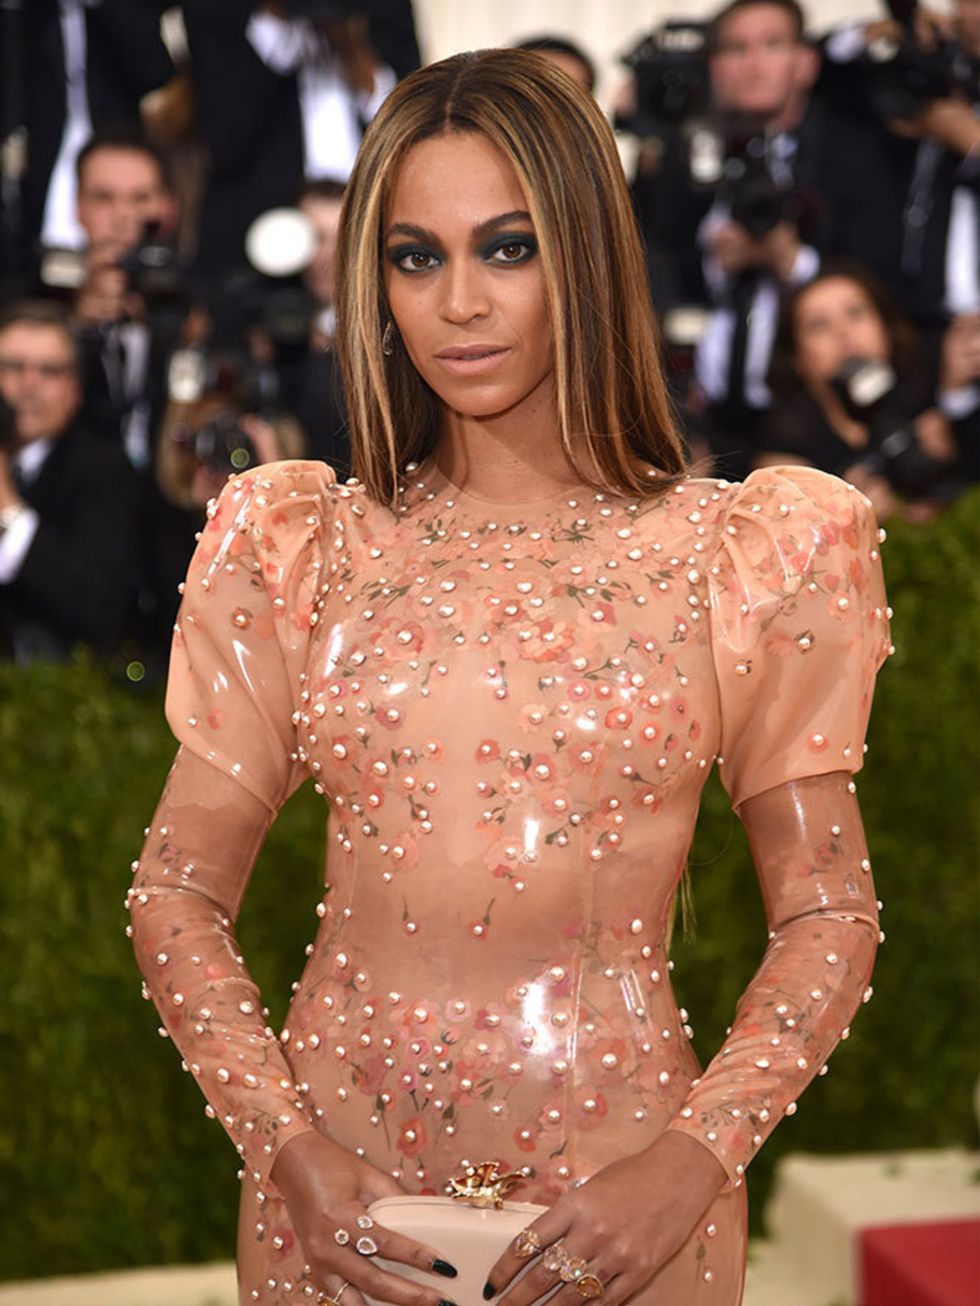 Beyoncé wears Givenchy Haute Couture by Riccardo Tisci at the Met Gala in New York, May 2016.